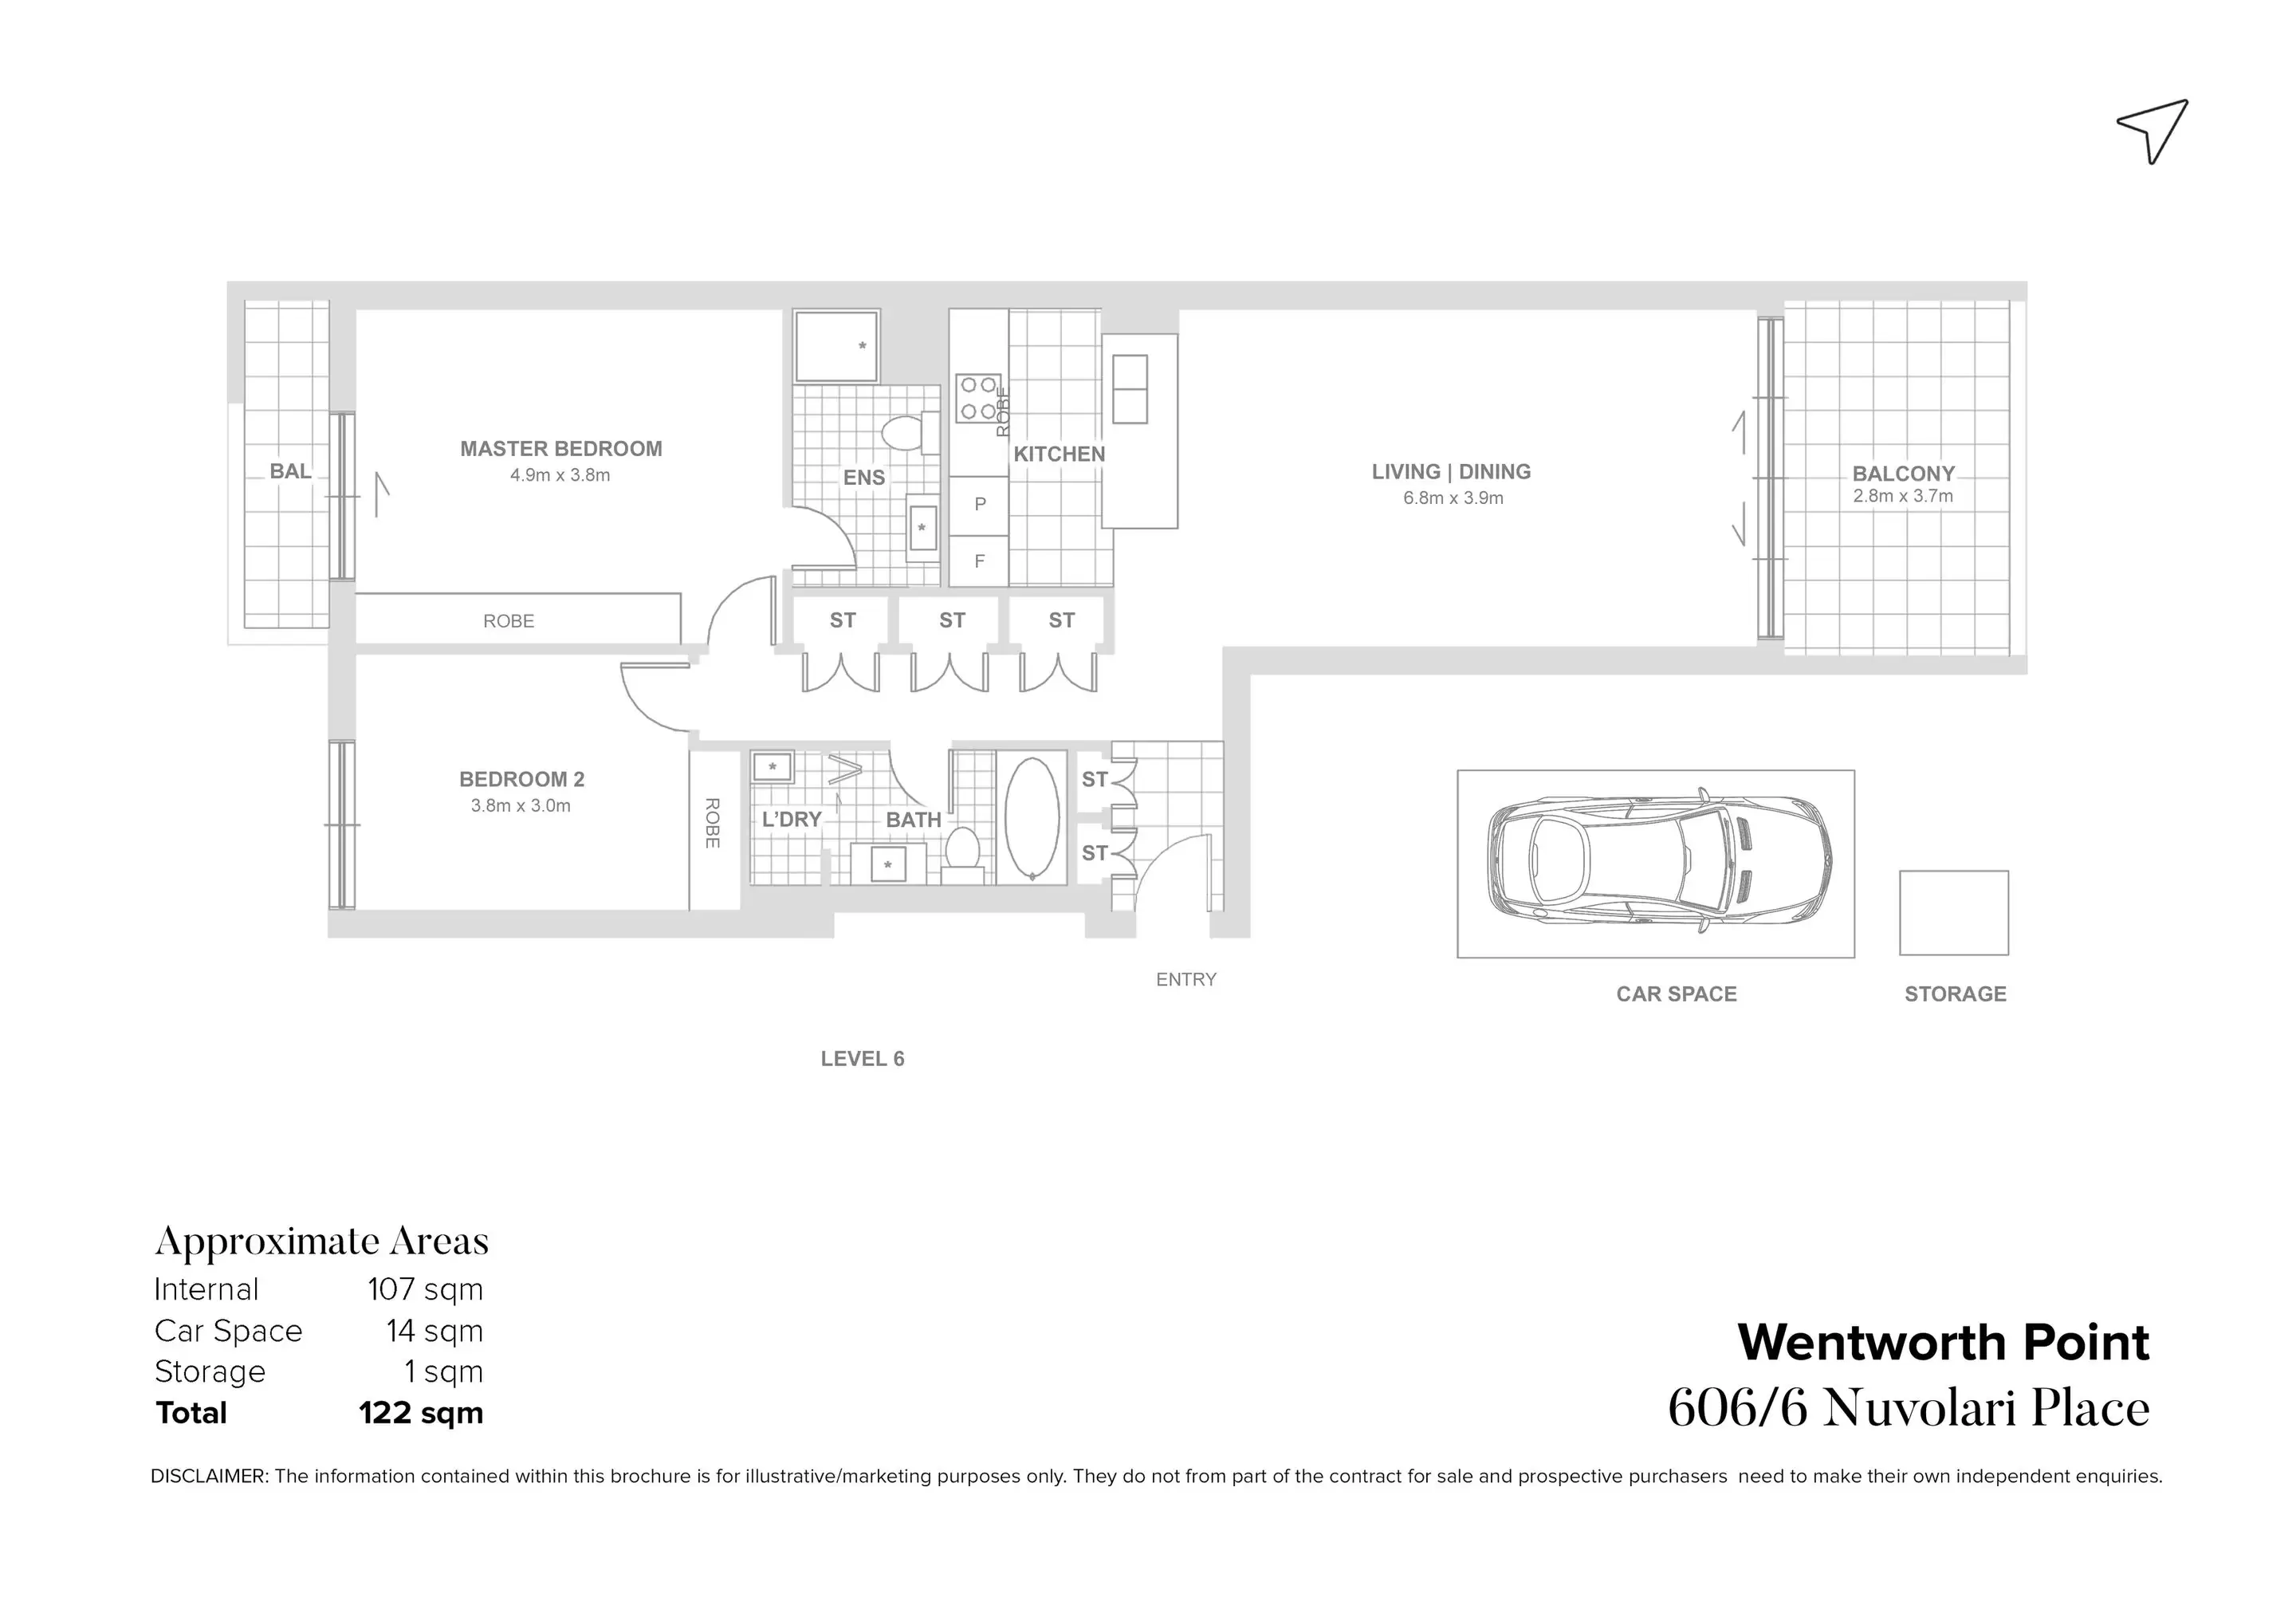 606/6 Nuvolari Place, Wentworth Point Sold by Chidiac Realty - floorplan